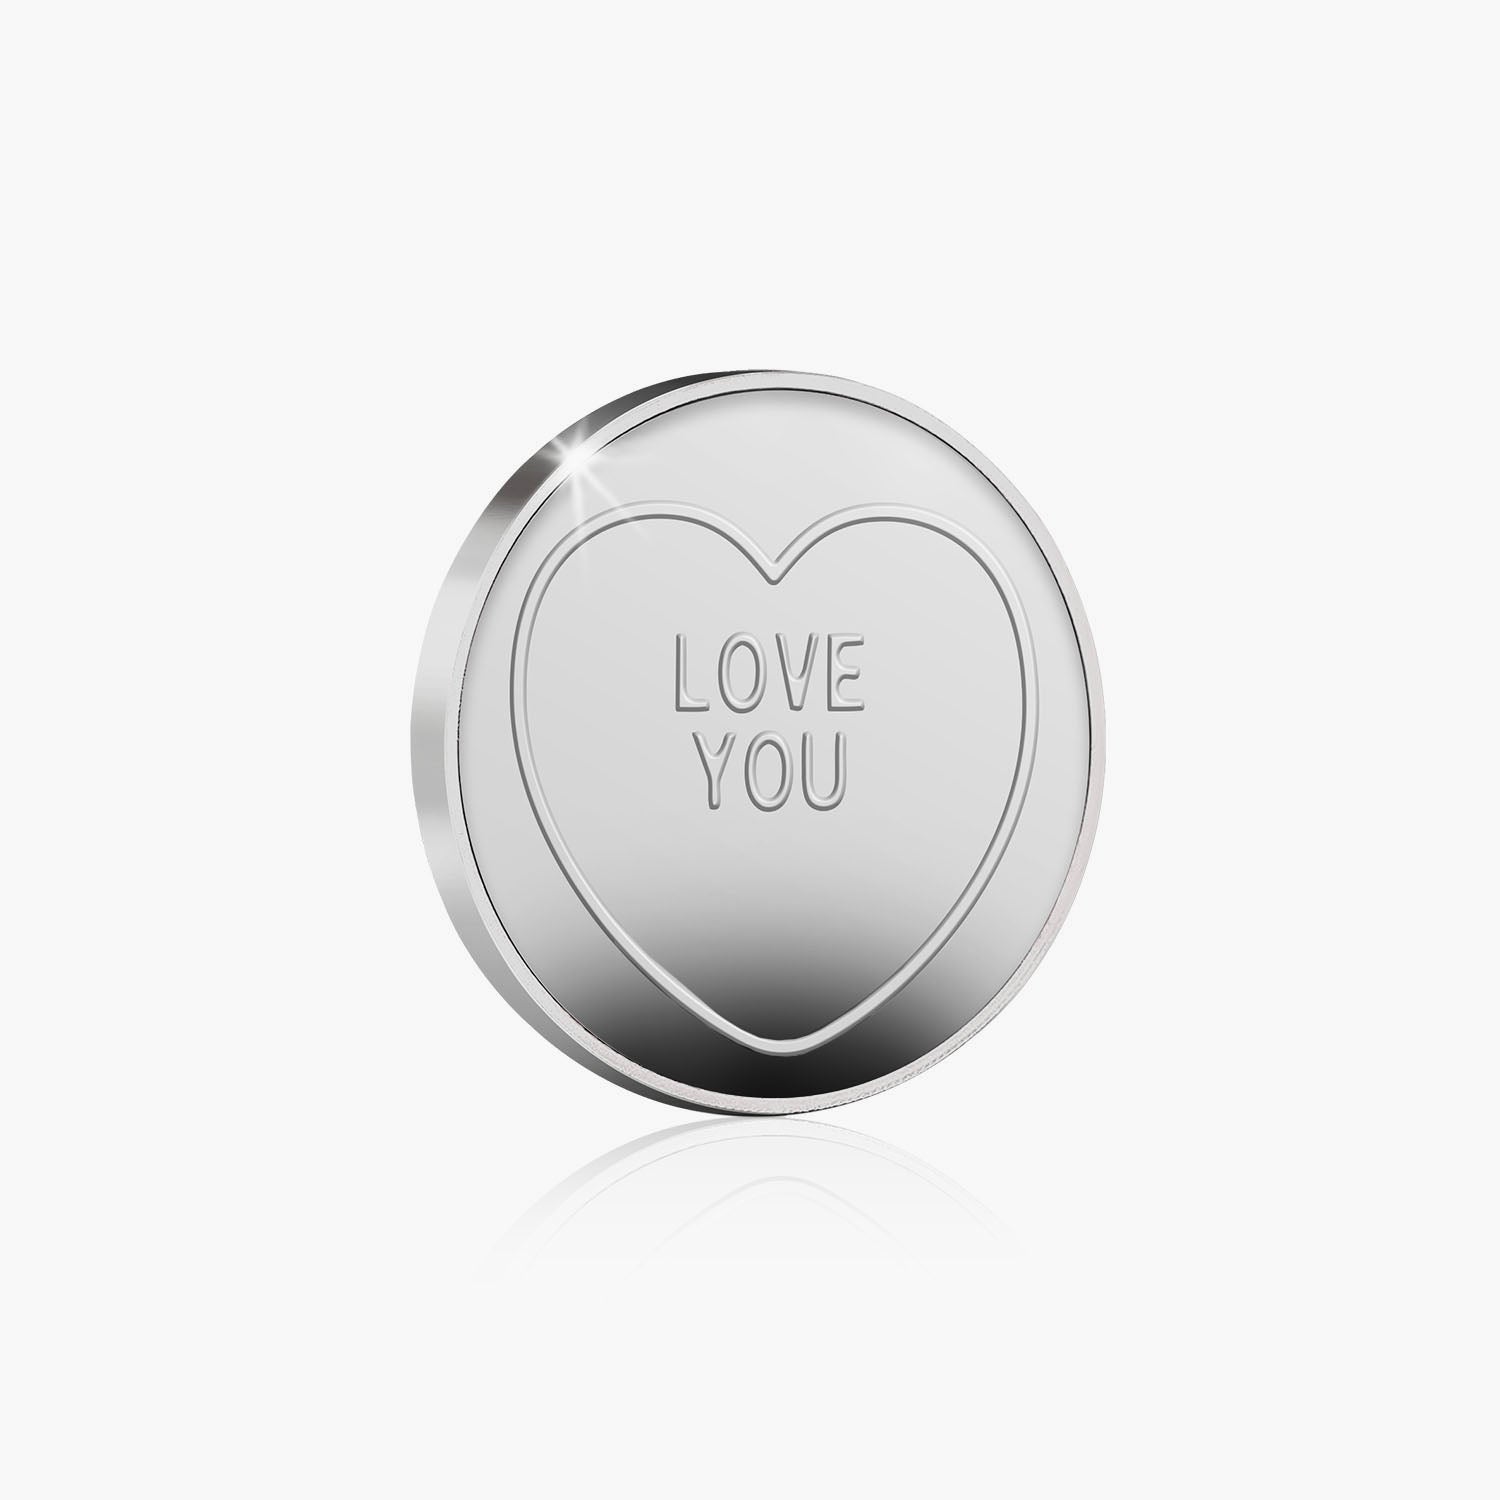 Love You Solid Silver Love Heart